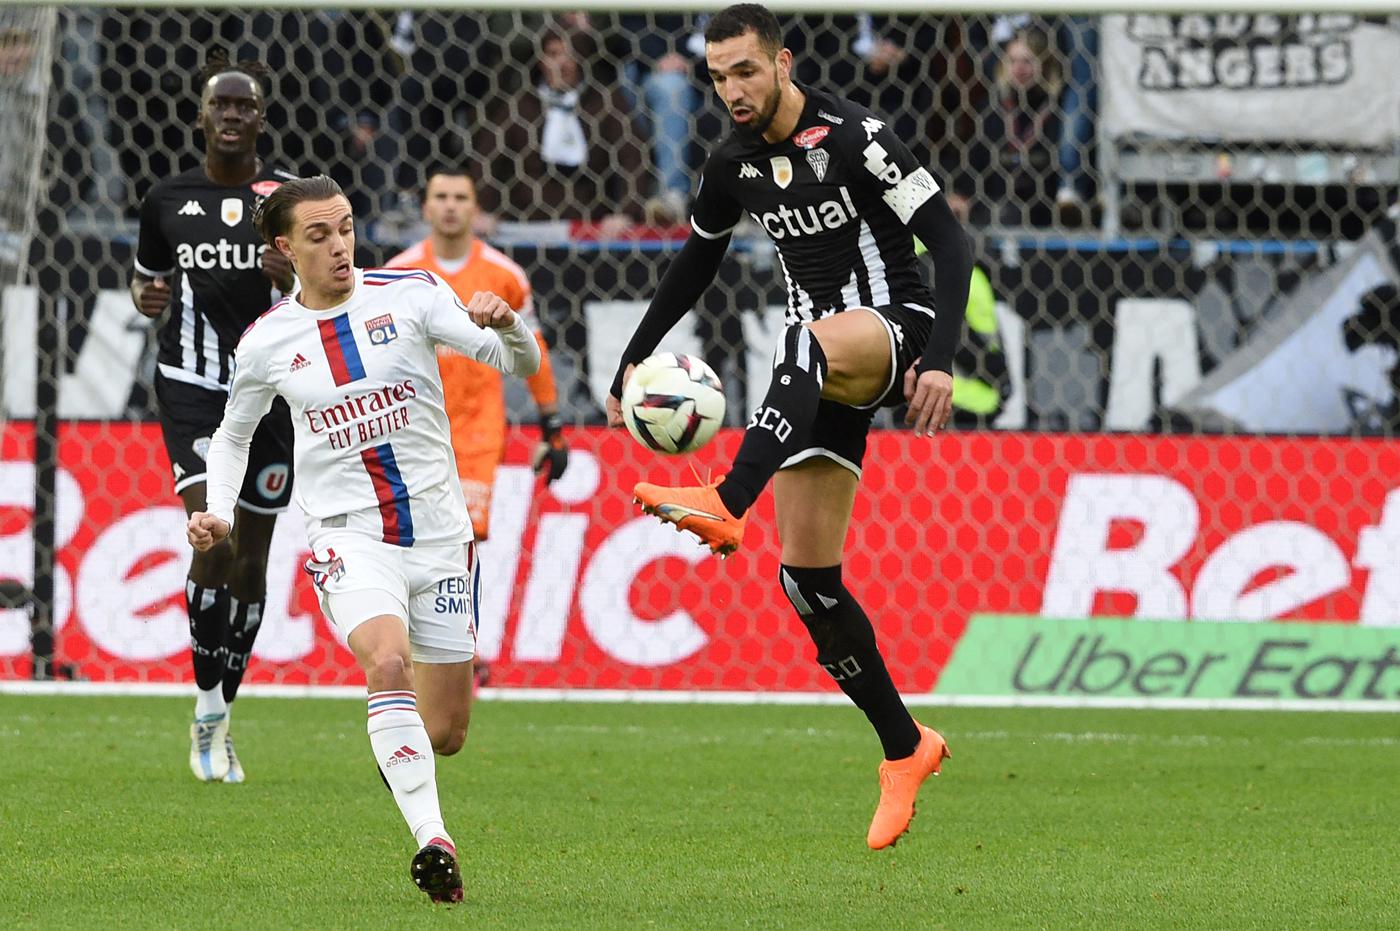 Angers - Lyon - 1:3. French Championship, 25th round. Match review, statistics.